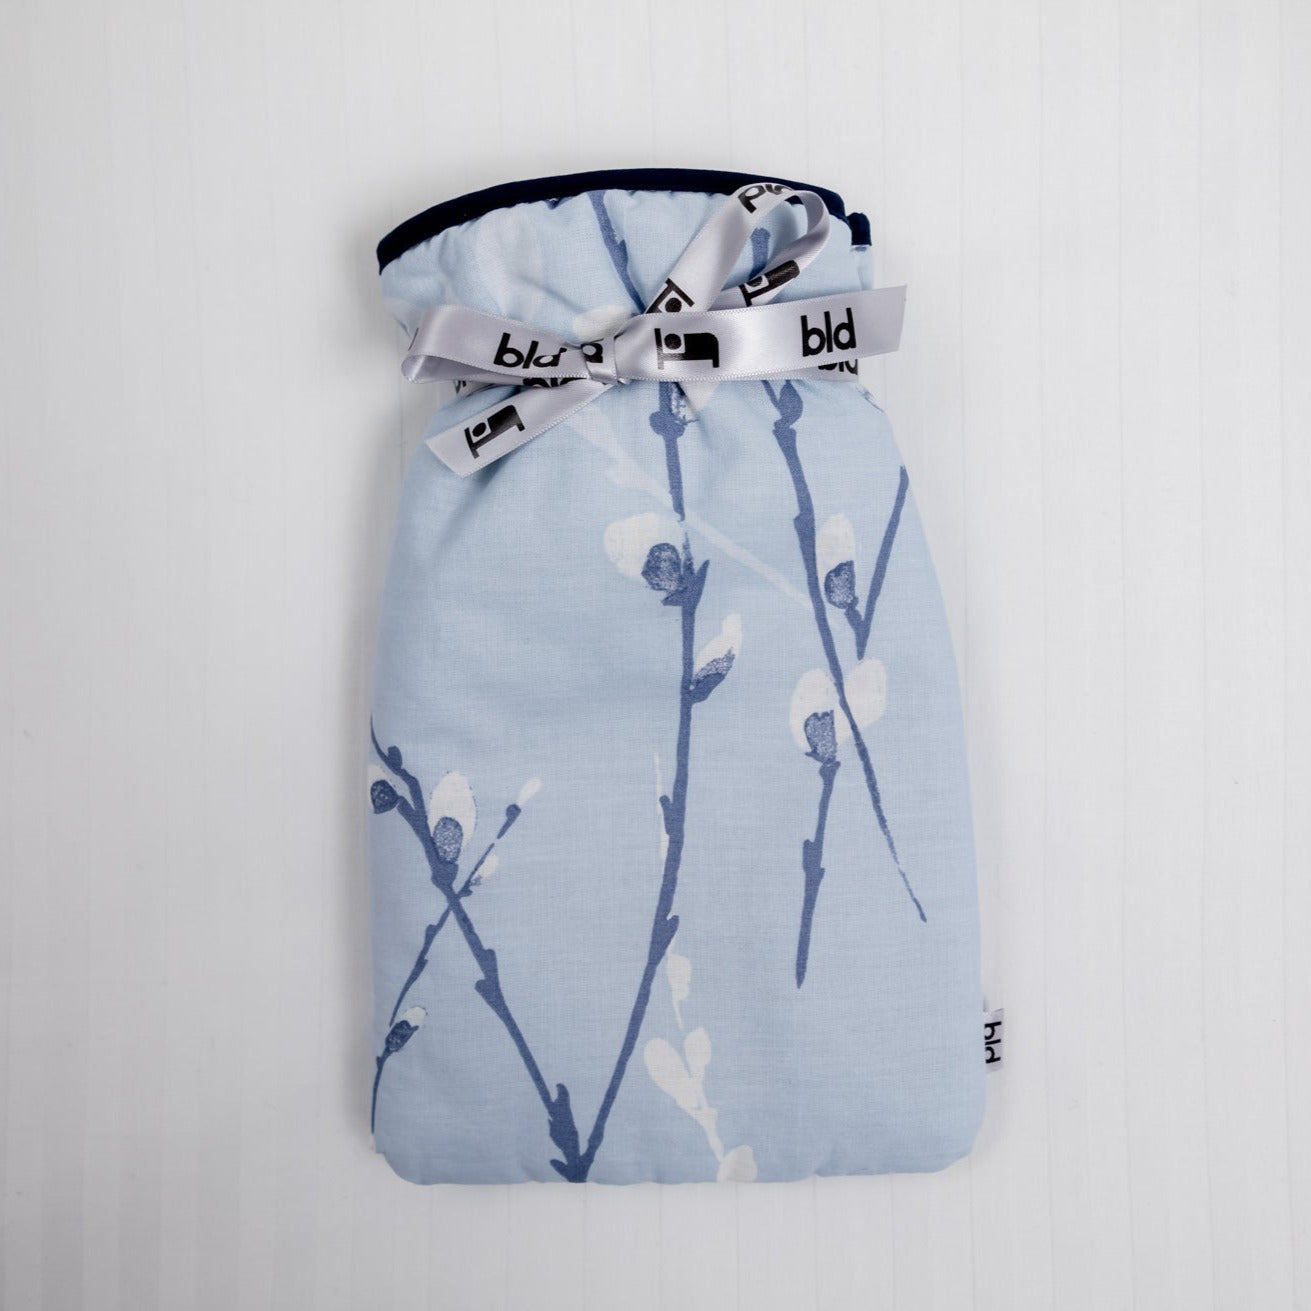 Small hot water bottle with blue and white floral soft padded cotton cover